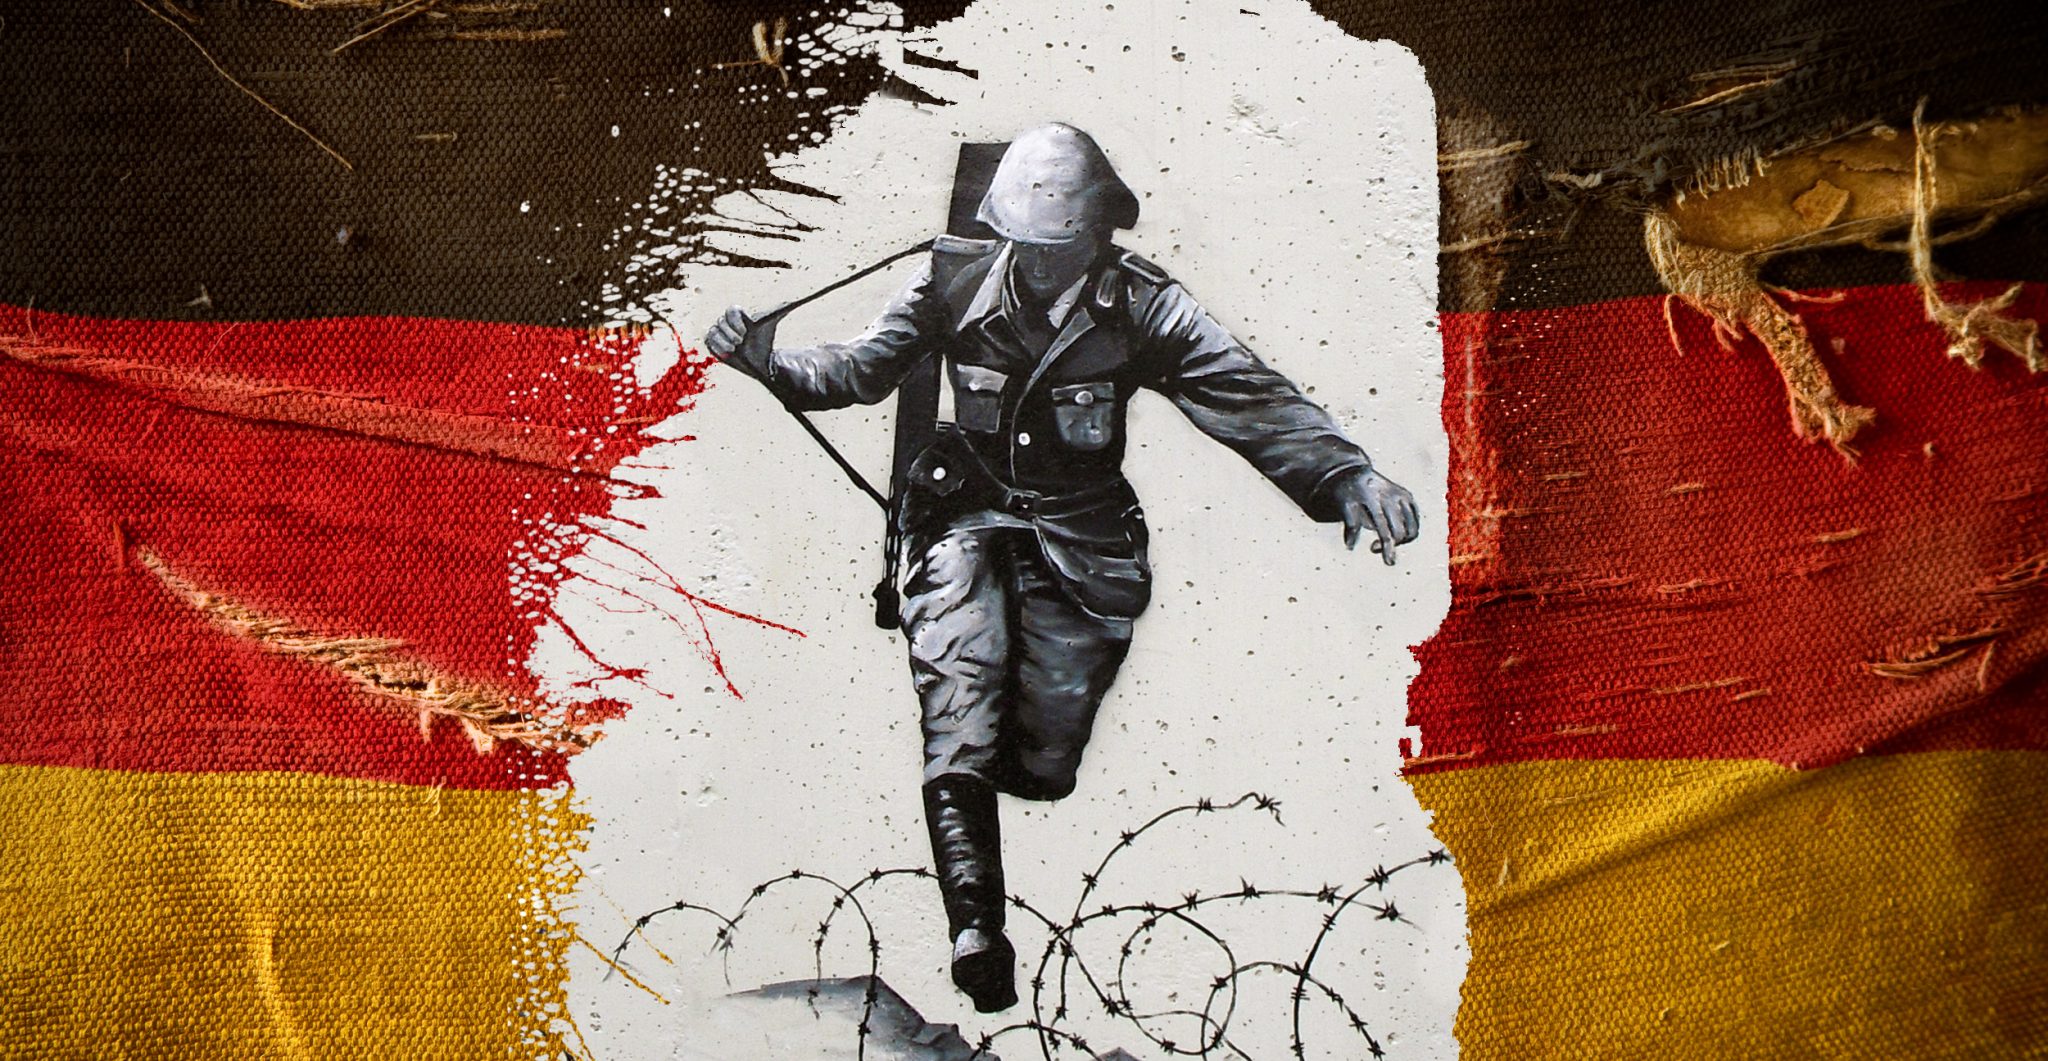 Image of Conrad Schumann's leap over the Berlin Wall.